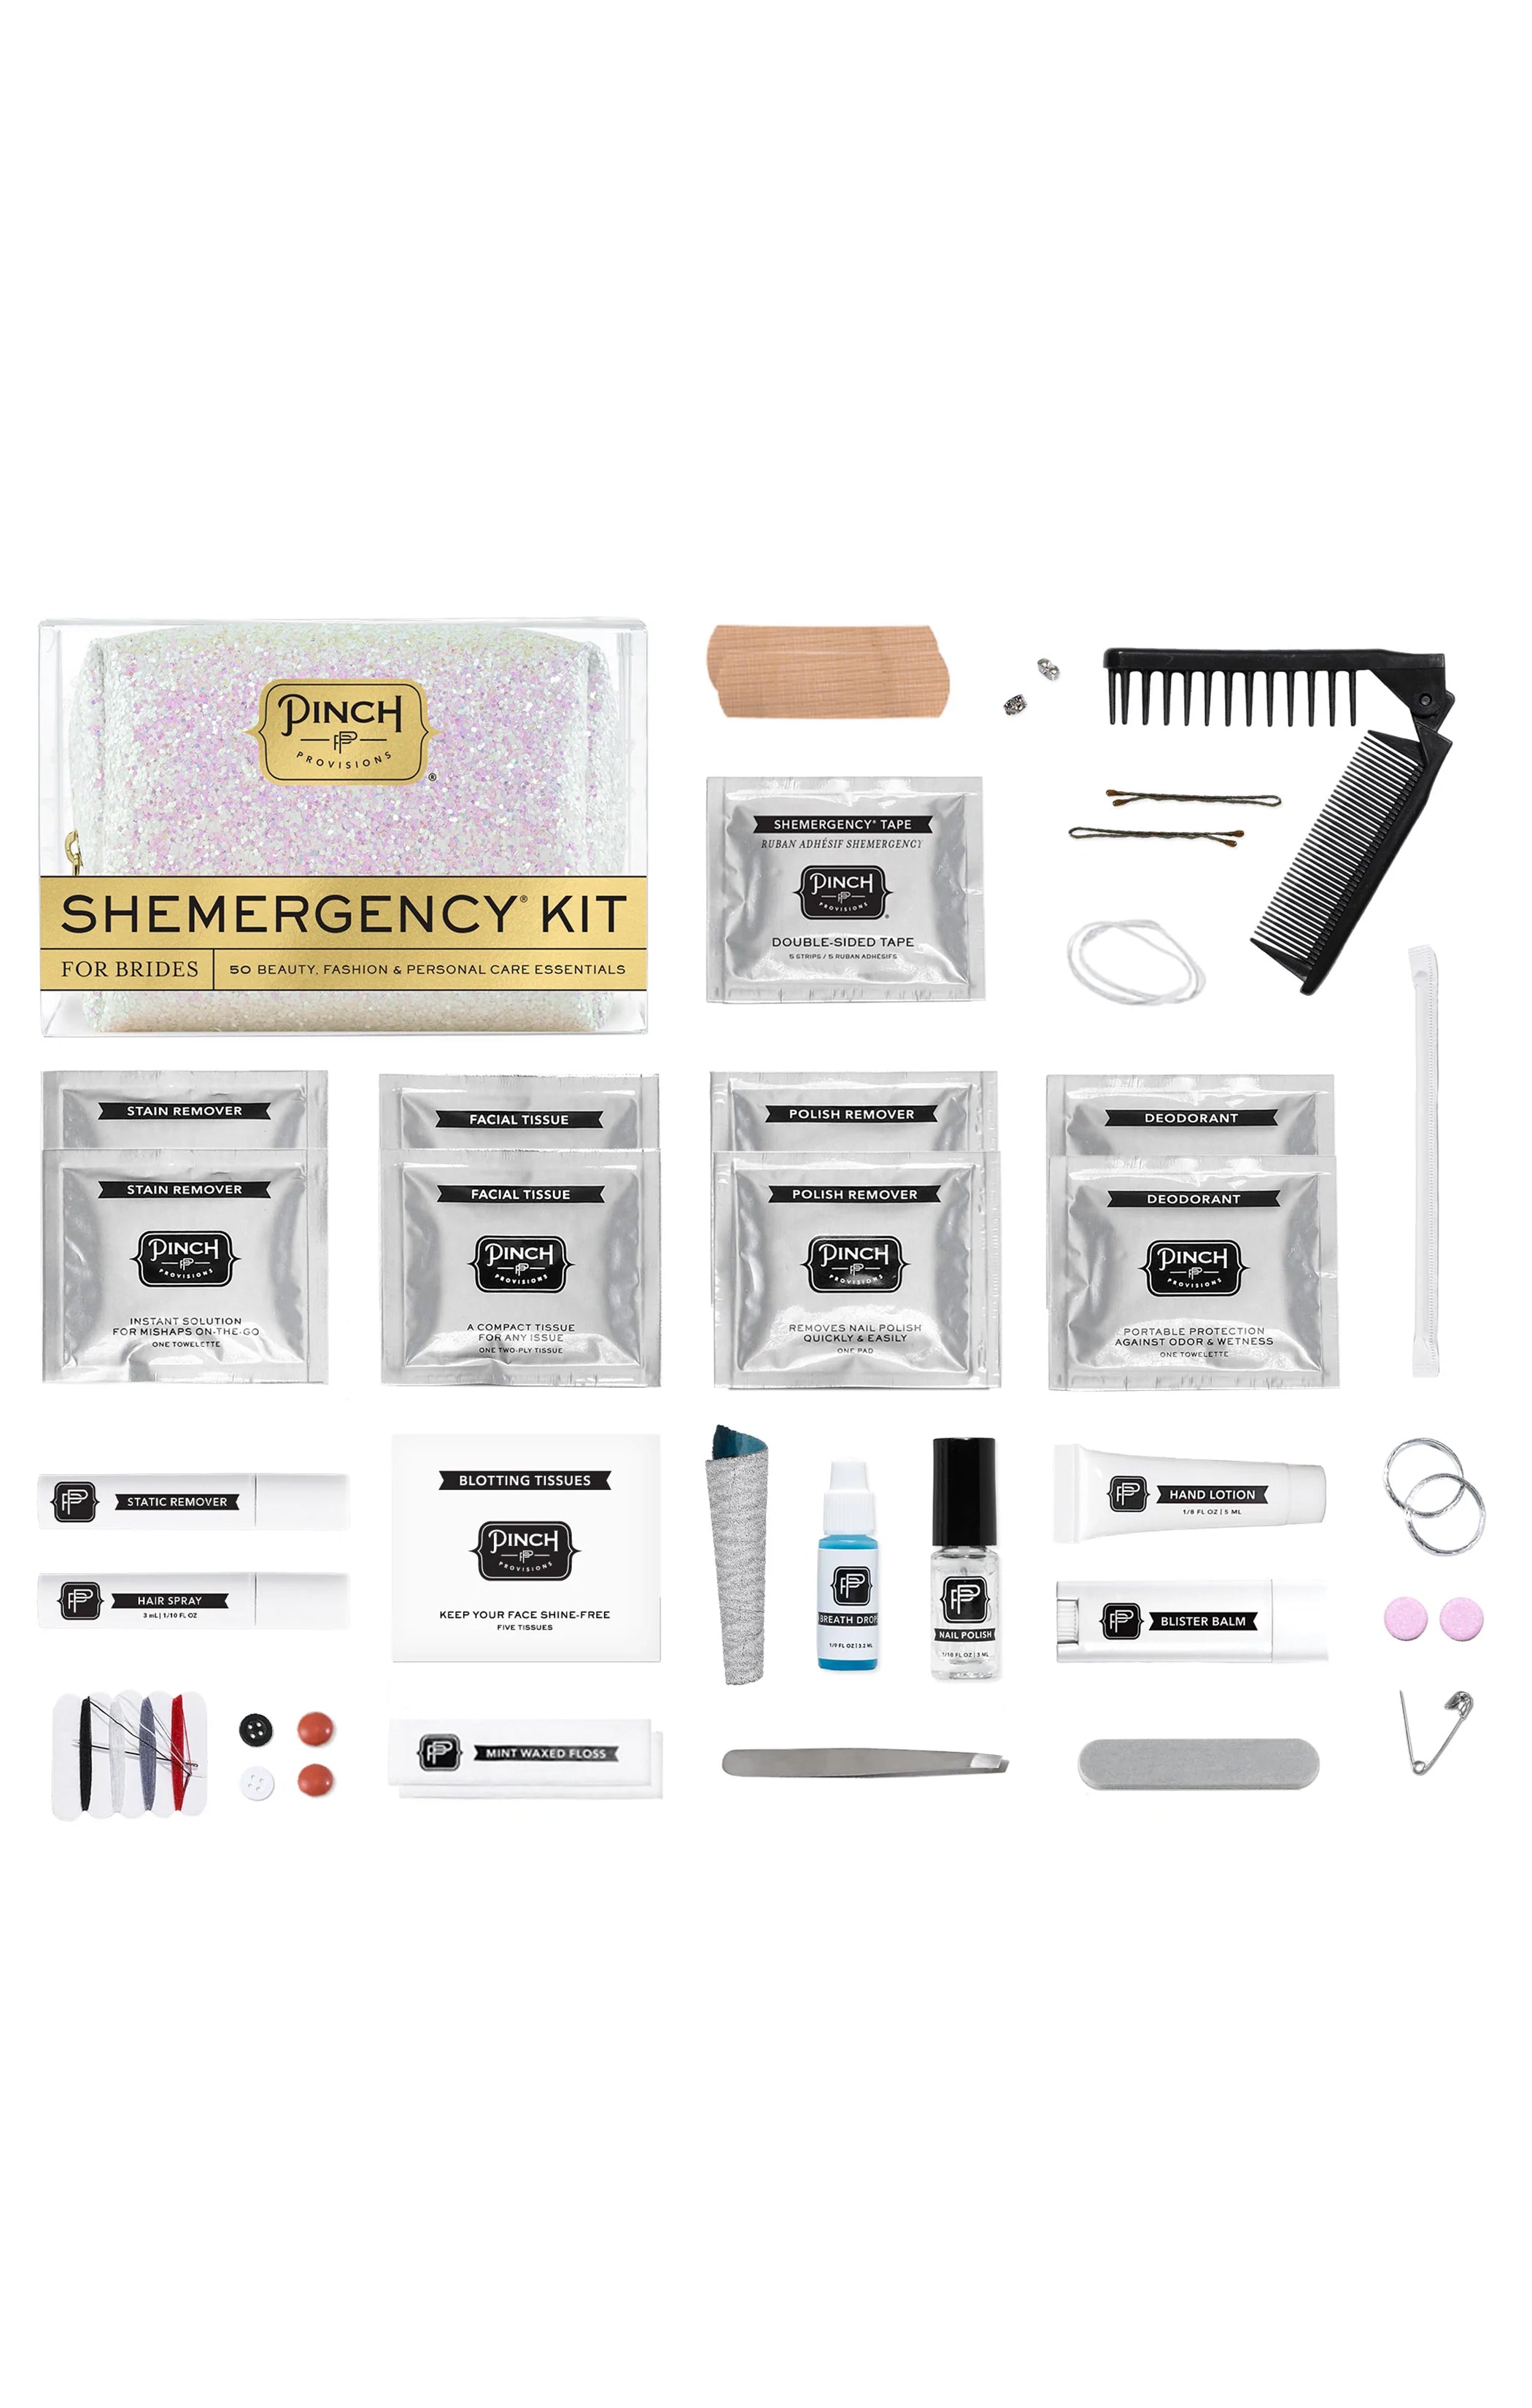 Shemergency Kit (Simmer Emergency Kit) for Everyday or Travel by Pinch  Provisions